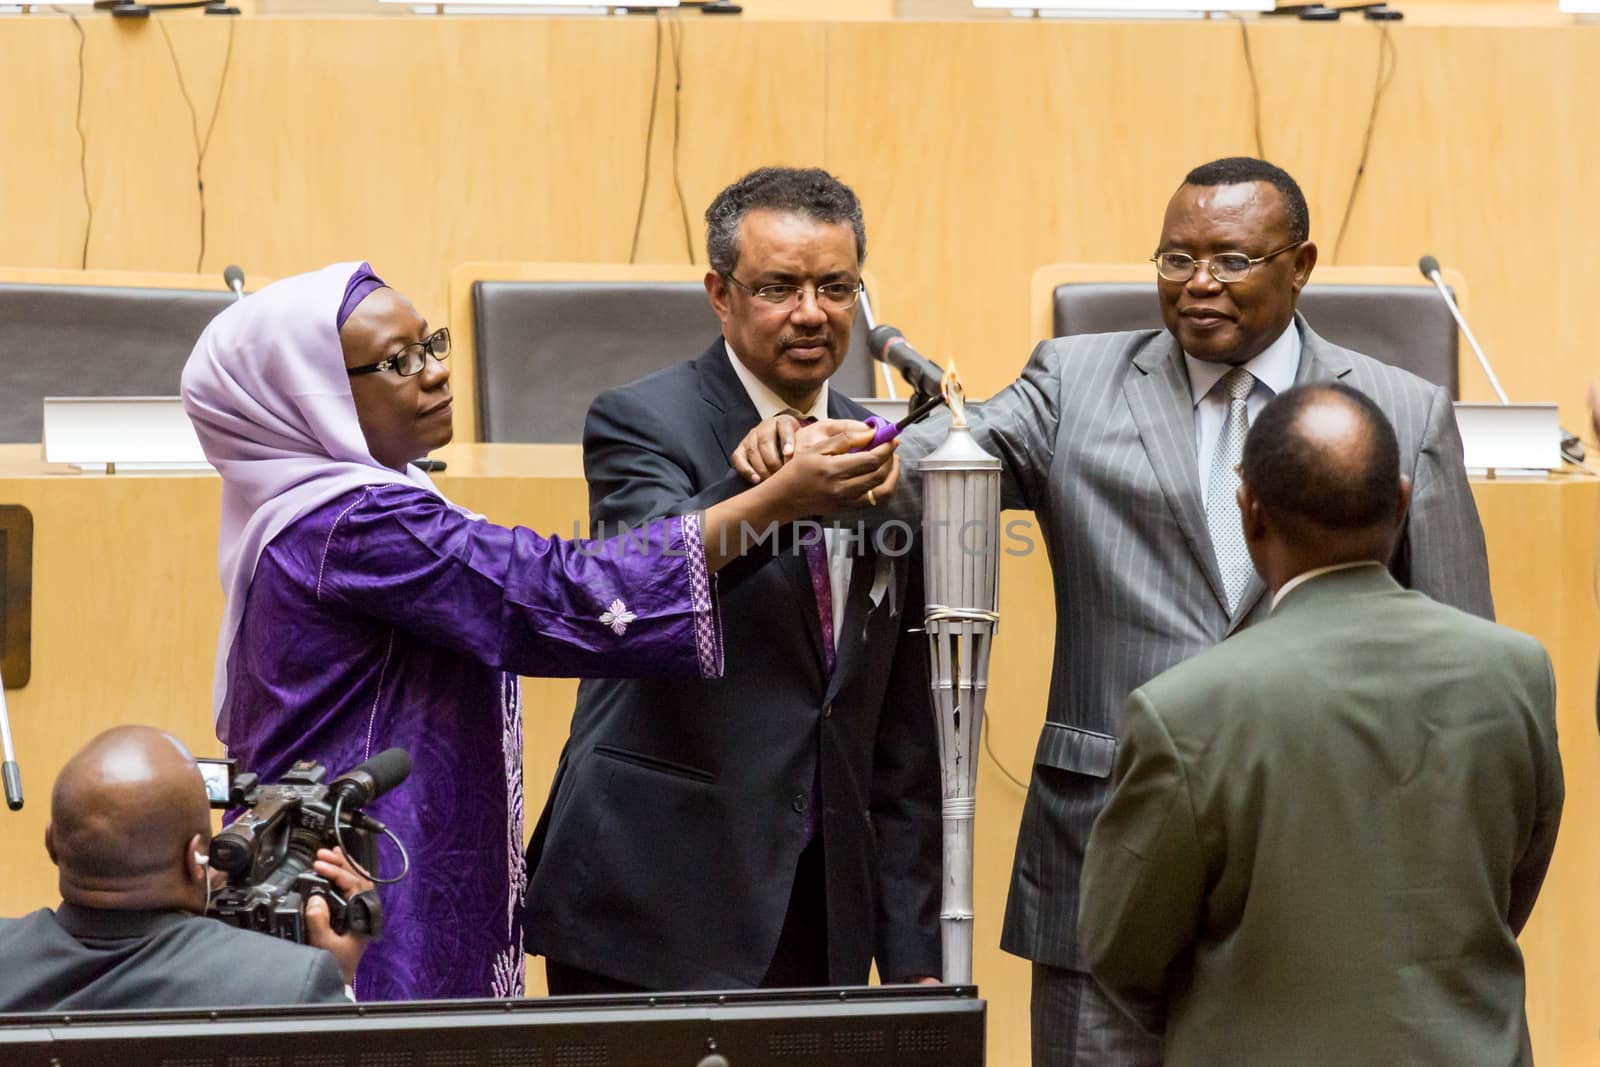 Addis Ababa, Ethiopia - April, 2014: Foreign minister of Ethiopia Dr. Tedros Adhanom, and Ambassador Nsengimana light the relay of a “flame of remembrance" which symbolizes memory, hope and preventing genocide, on 11 April, 2014, in Addis Ababa, Ethiopia